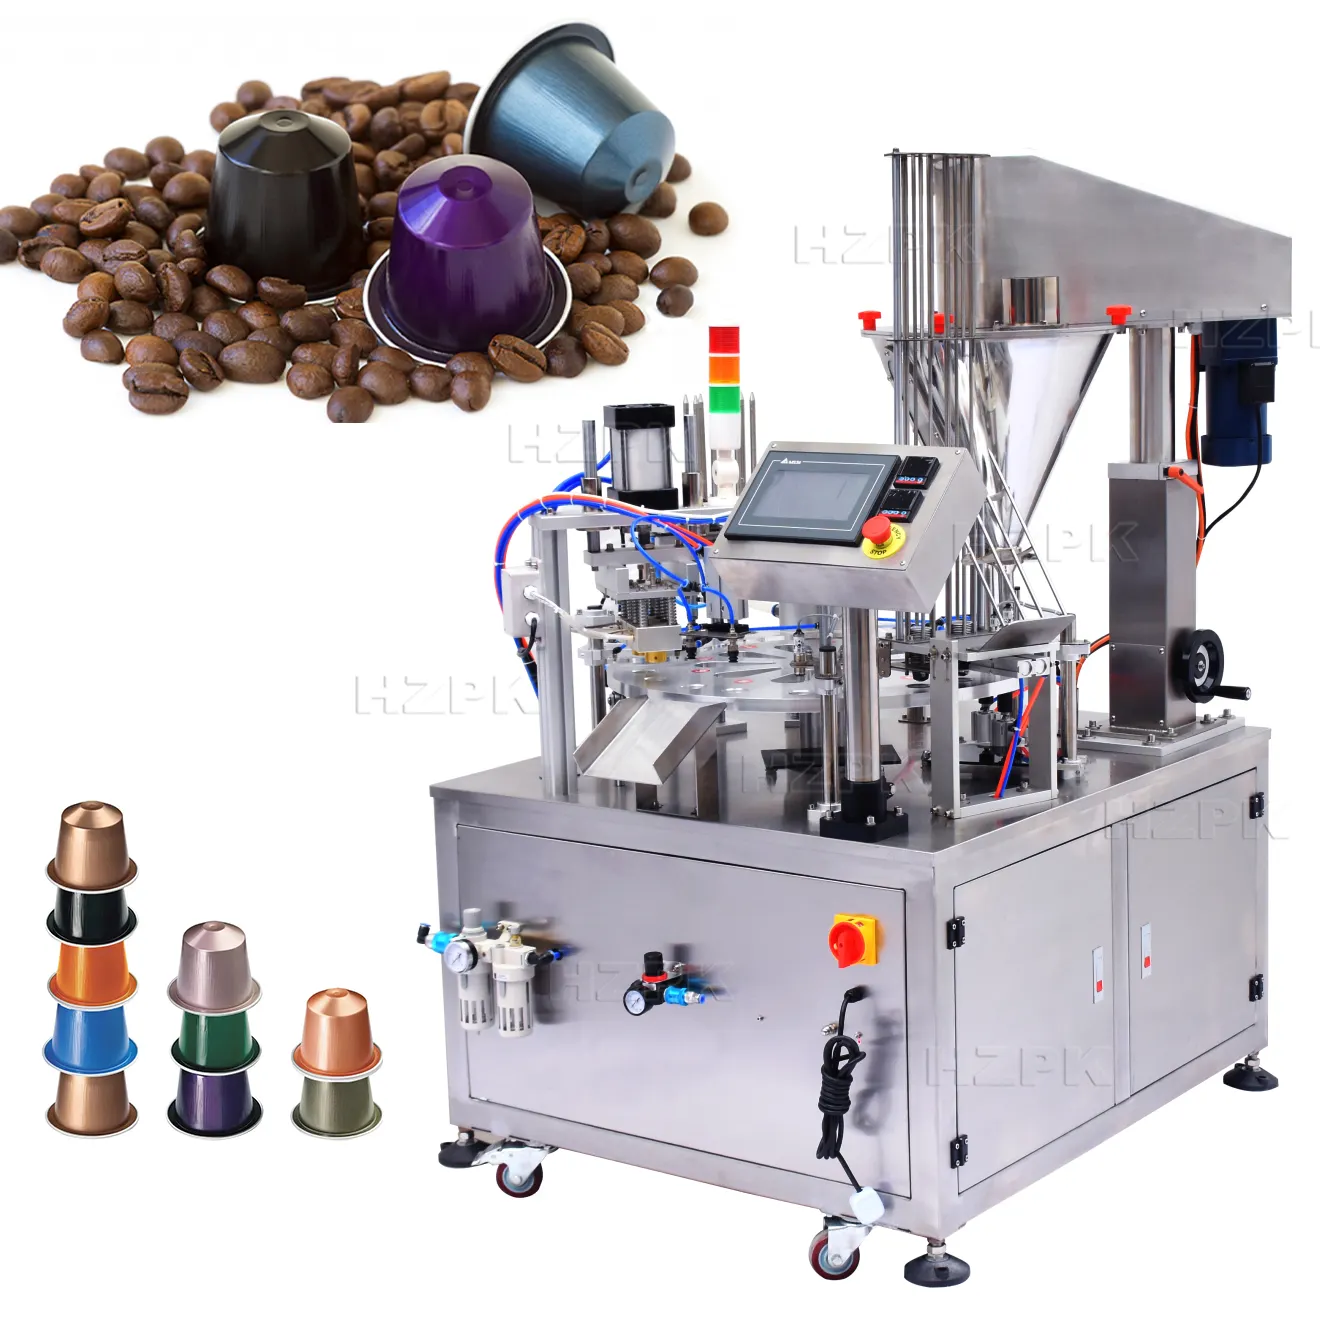 HZPK Automatic Powder Rotary K Cup Coffee Capsule Filling And Sealing Machine For K Cup